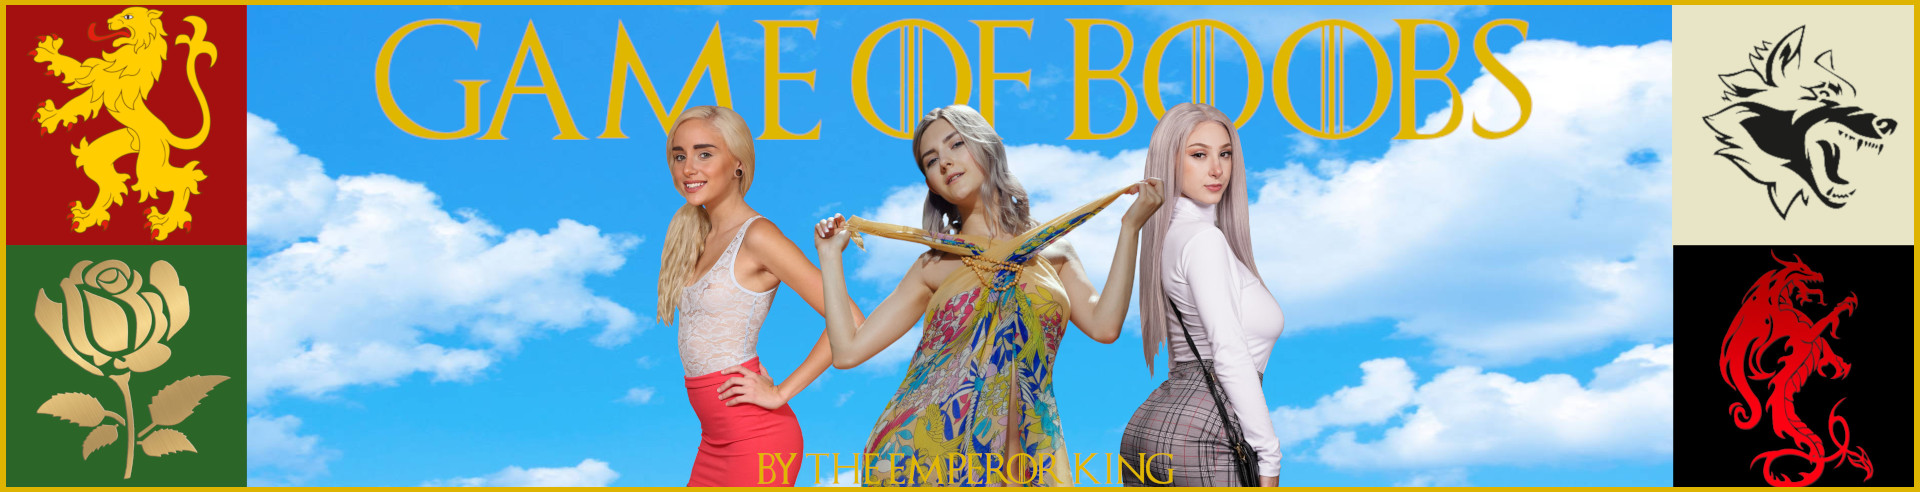 Game of Boobs poster